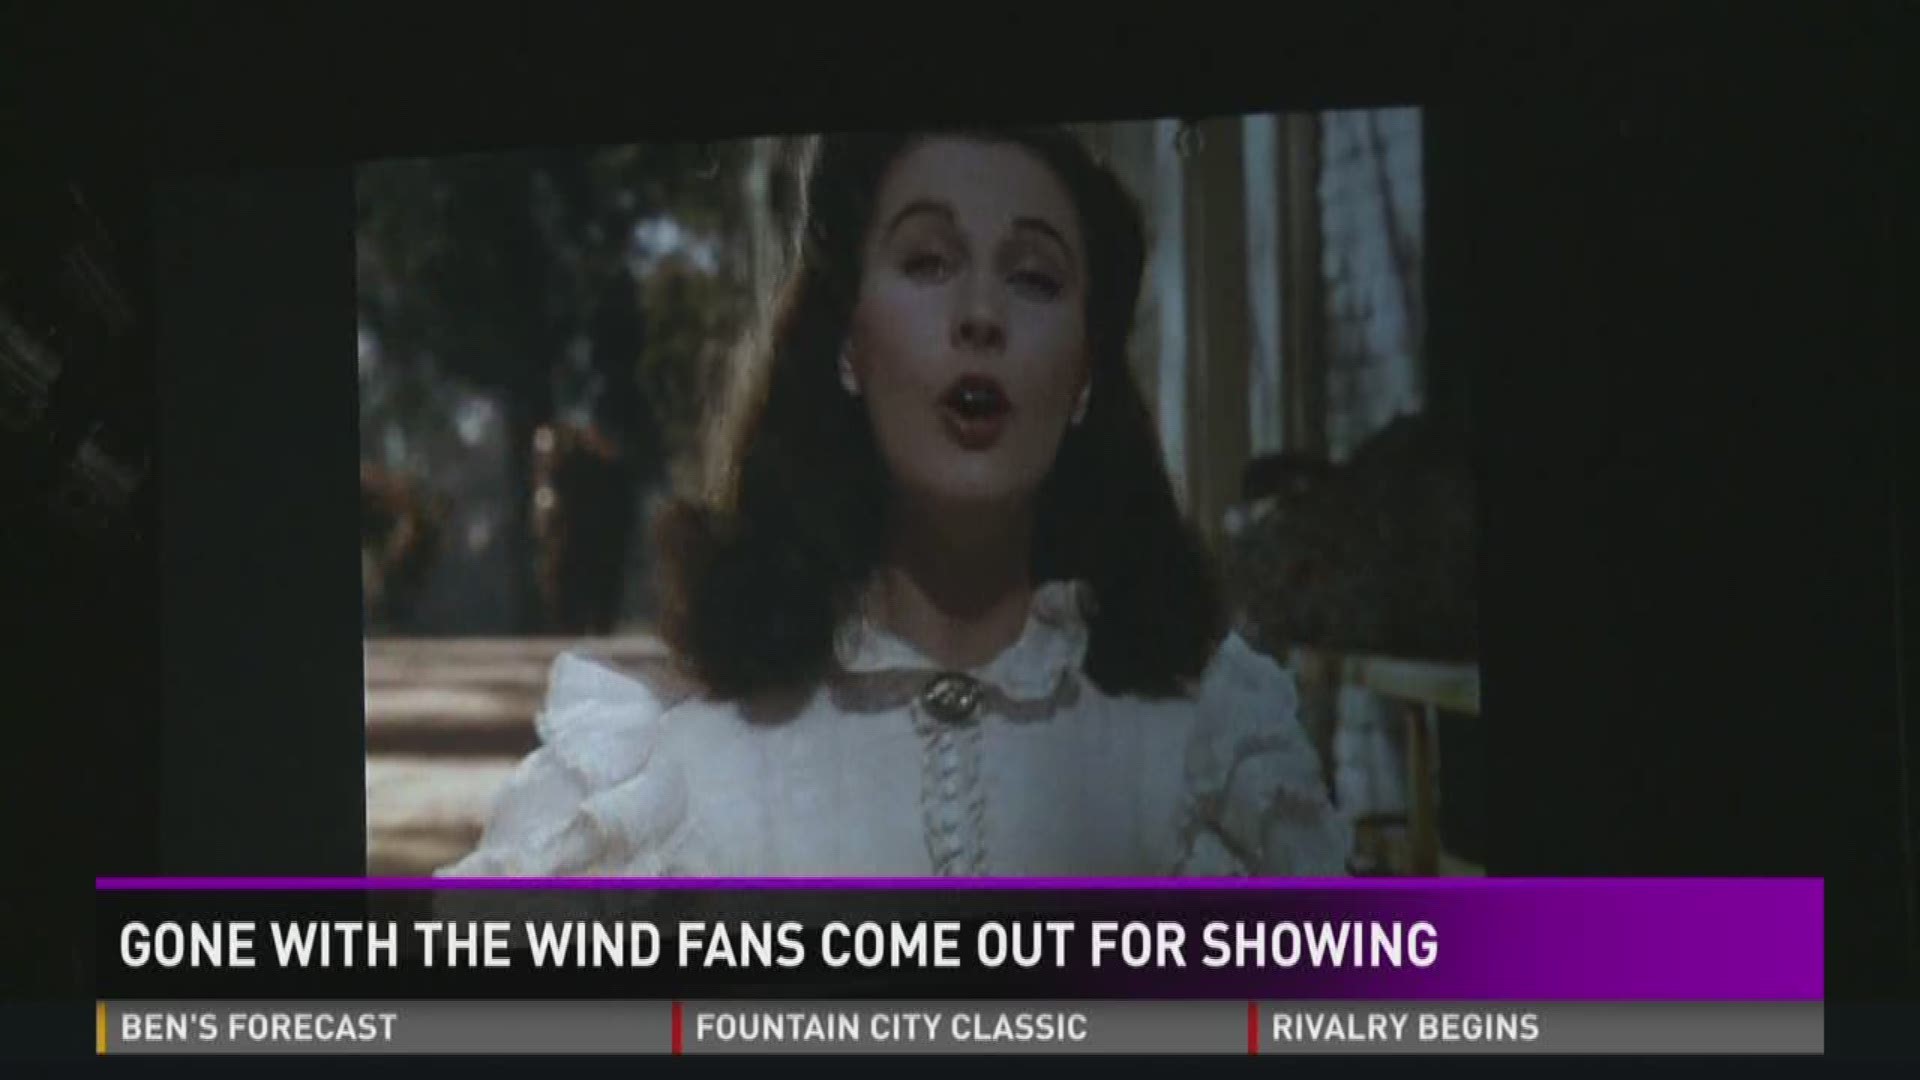 'Gone With the Wind' fans come out for showing